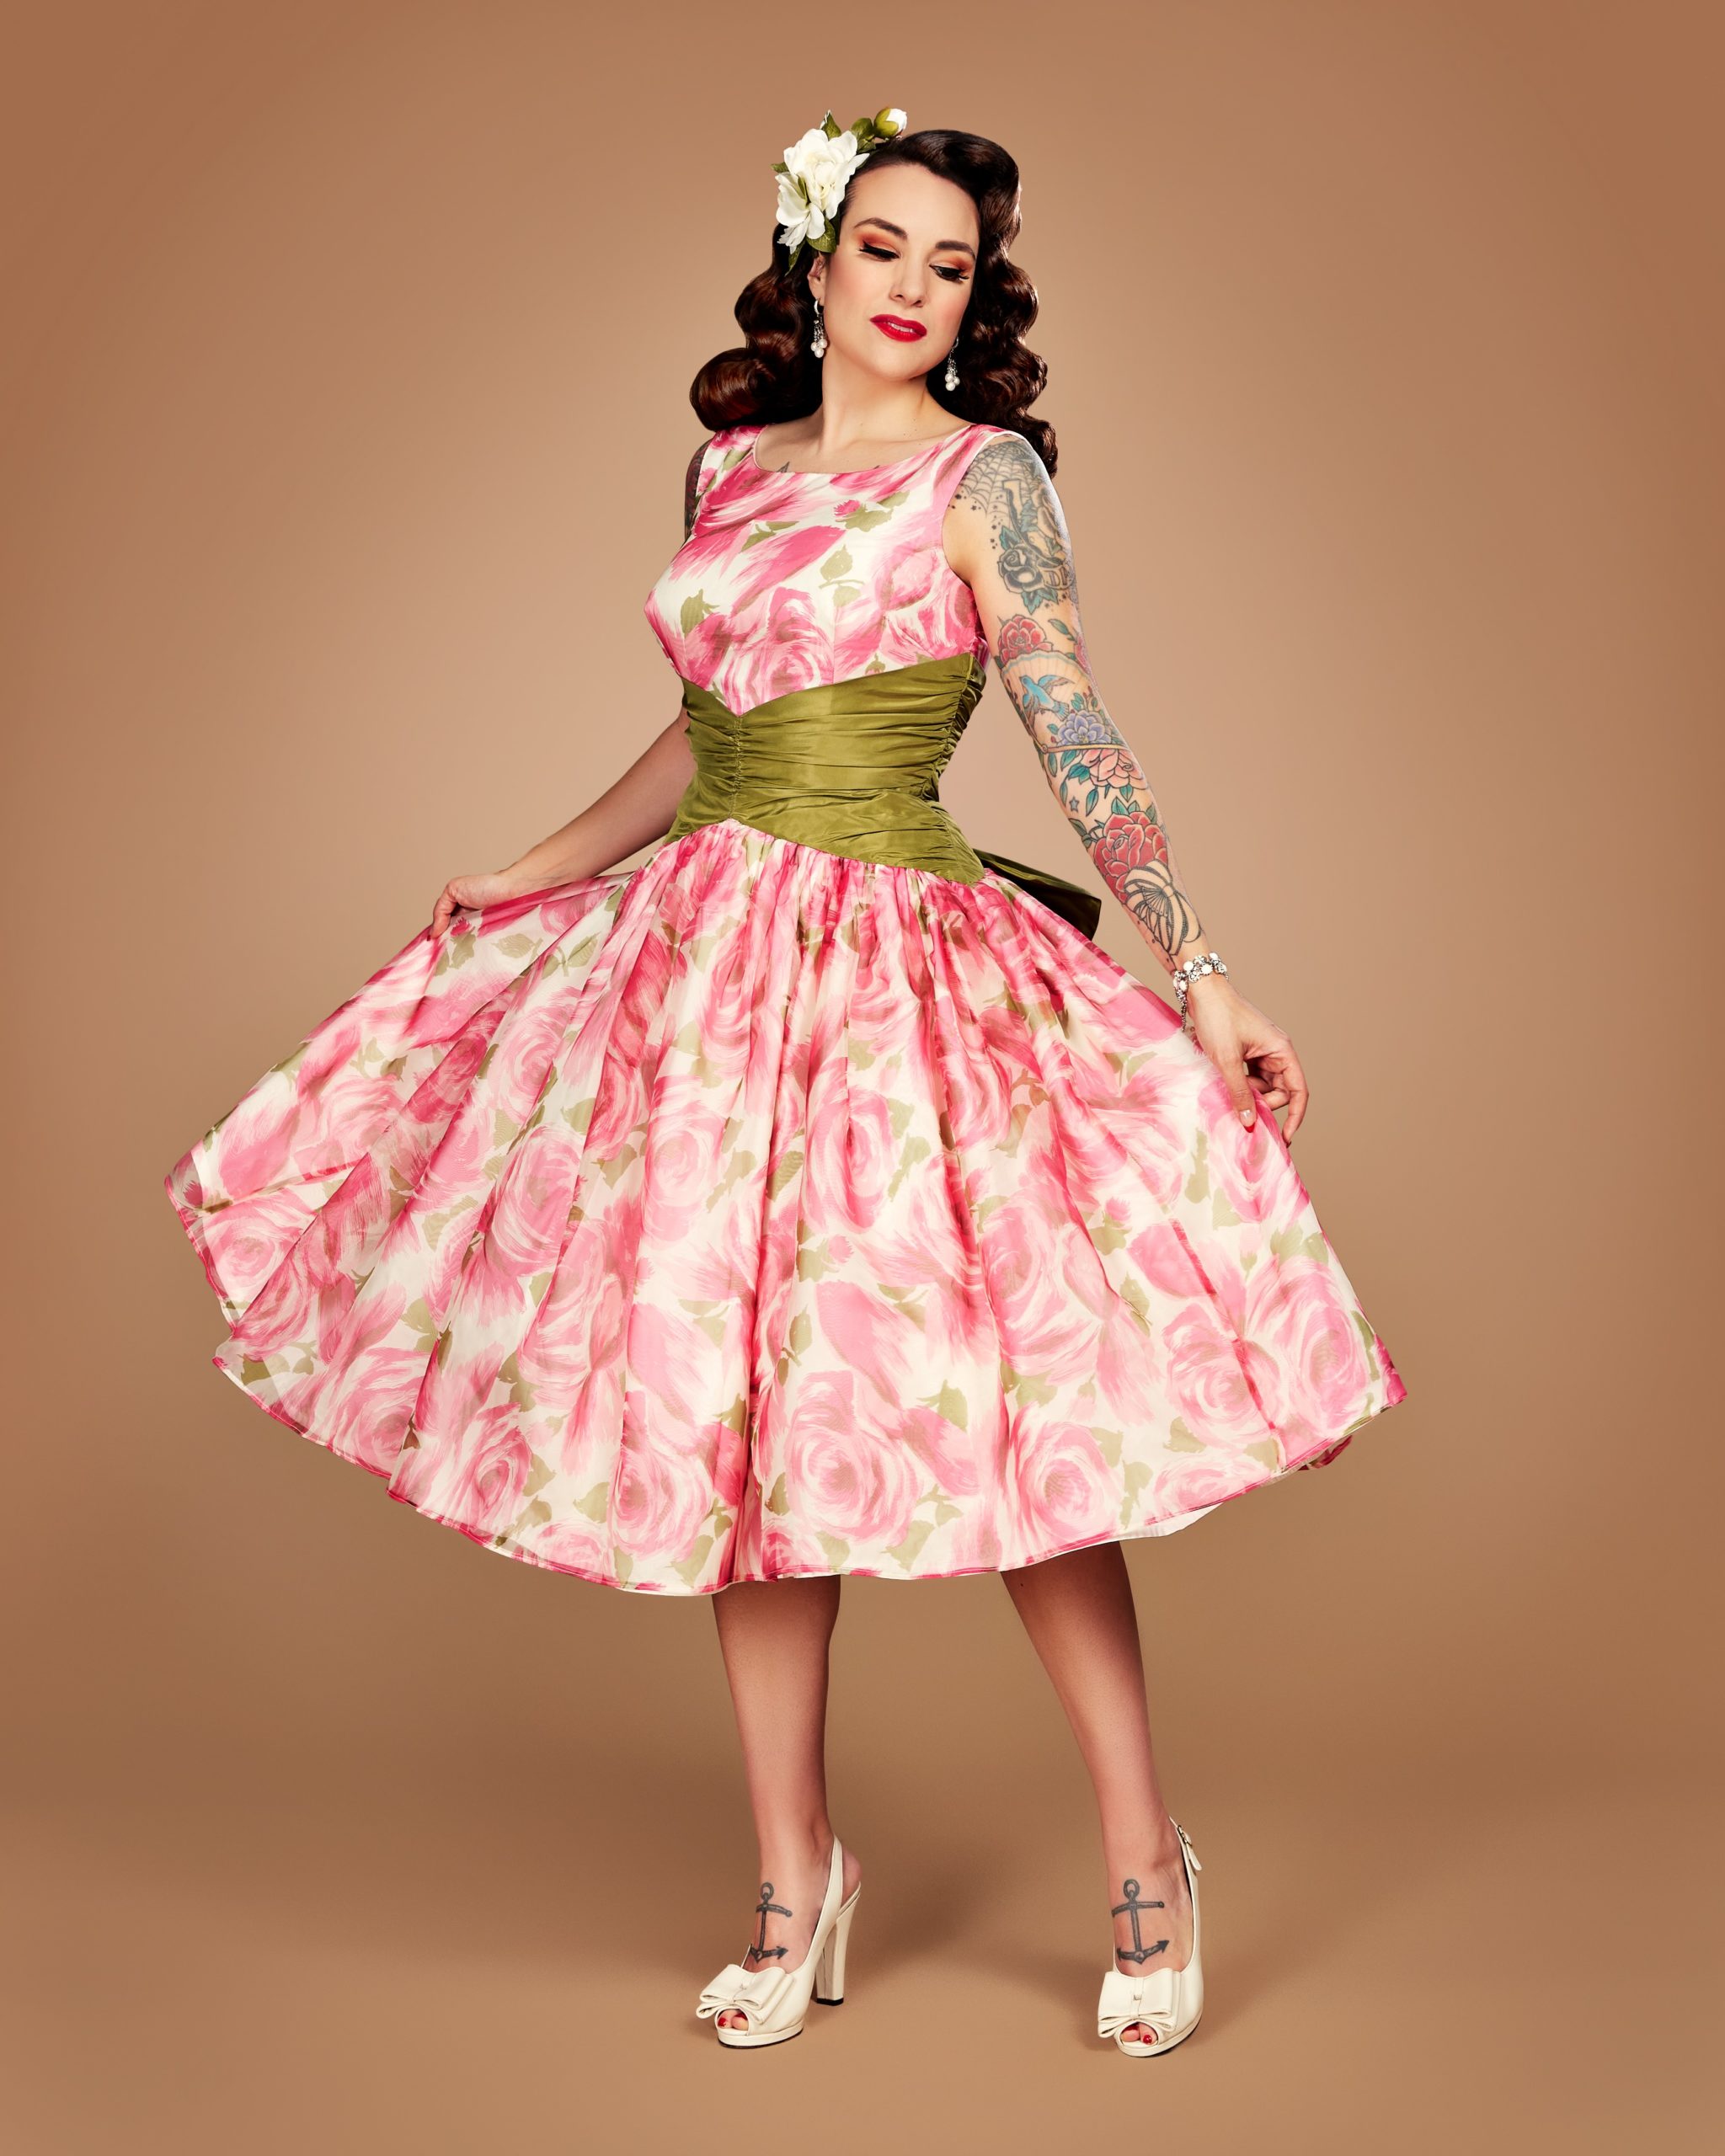 Gertie's Betty Dress Sewing Tutorial, Mad Men Vintage Inspired